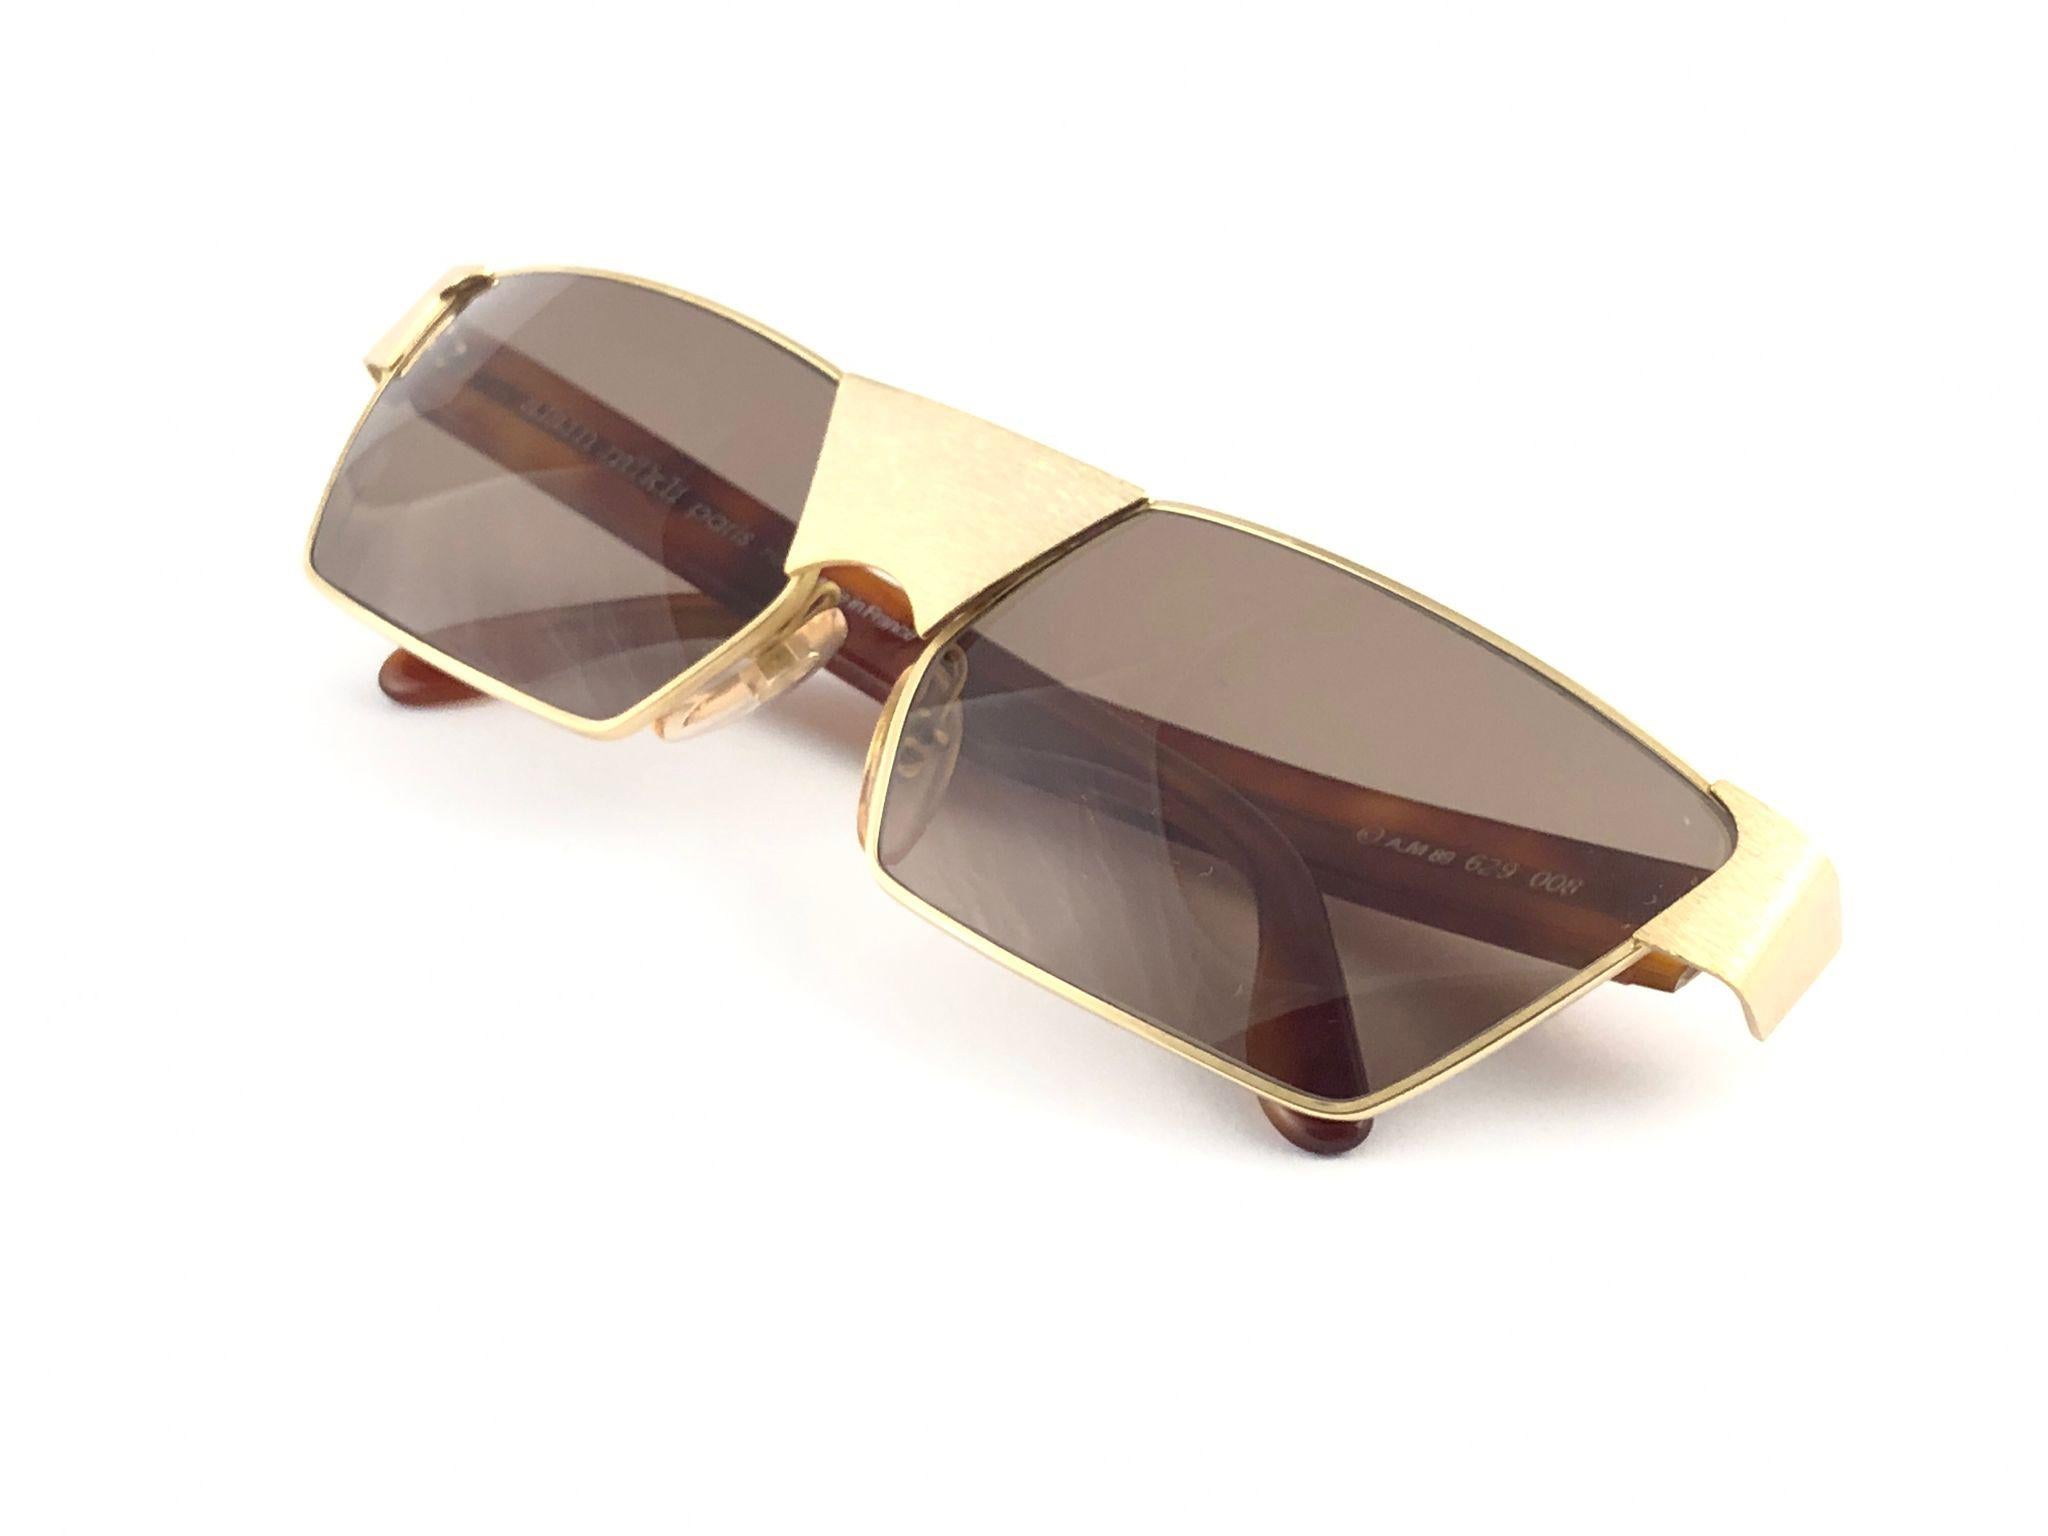 New Vintage Alain Mikli AM89 629008 Gold & Tortoise France Sunglasses 1980's In New Condition For Sale In Baleares, Baleares